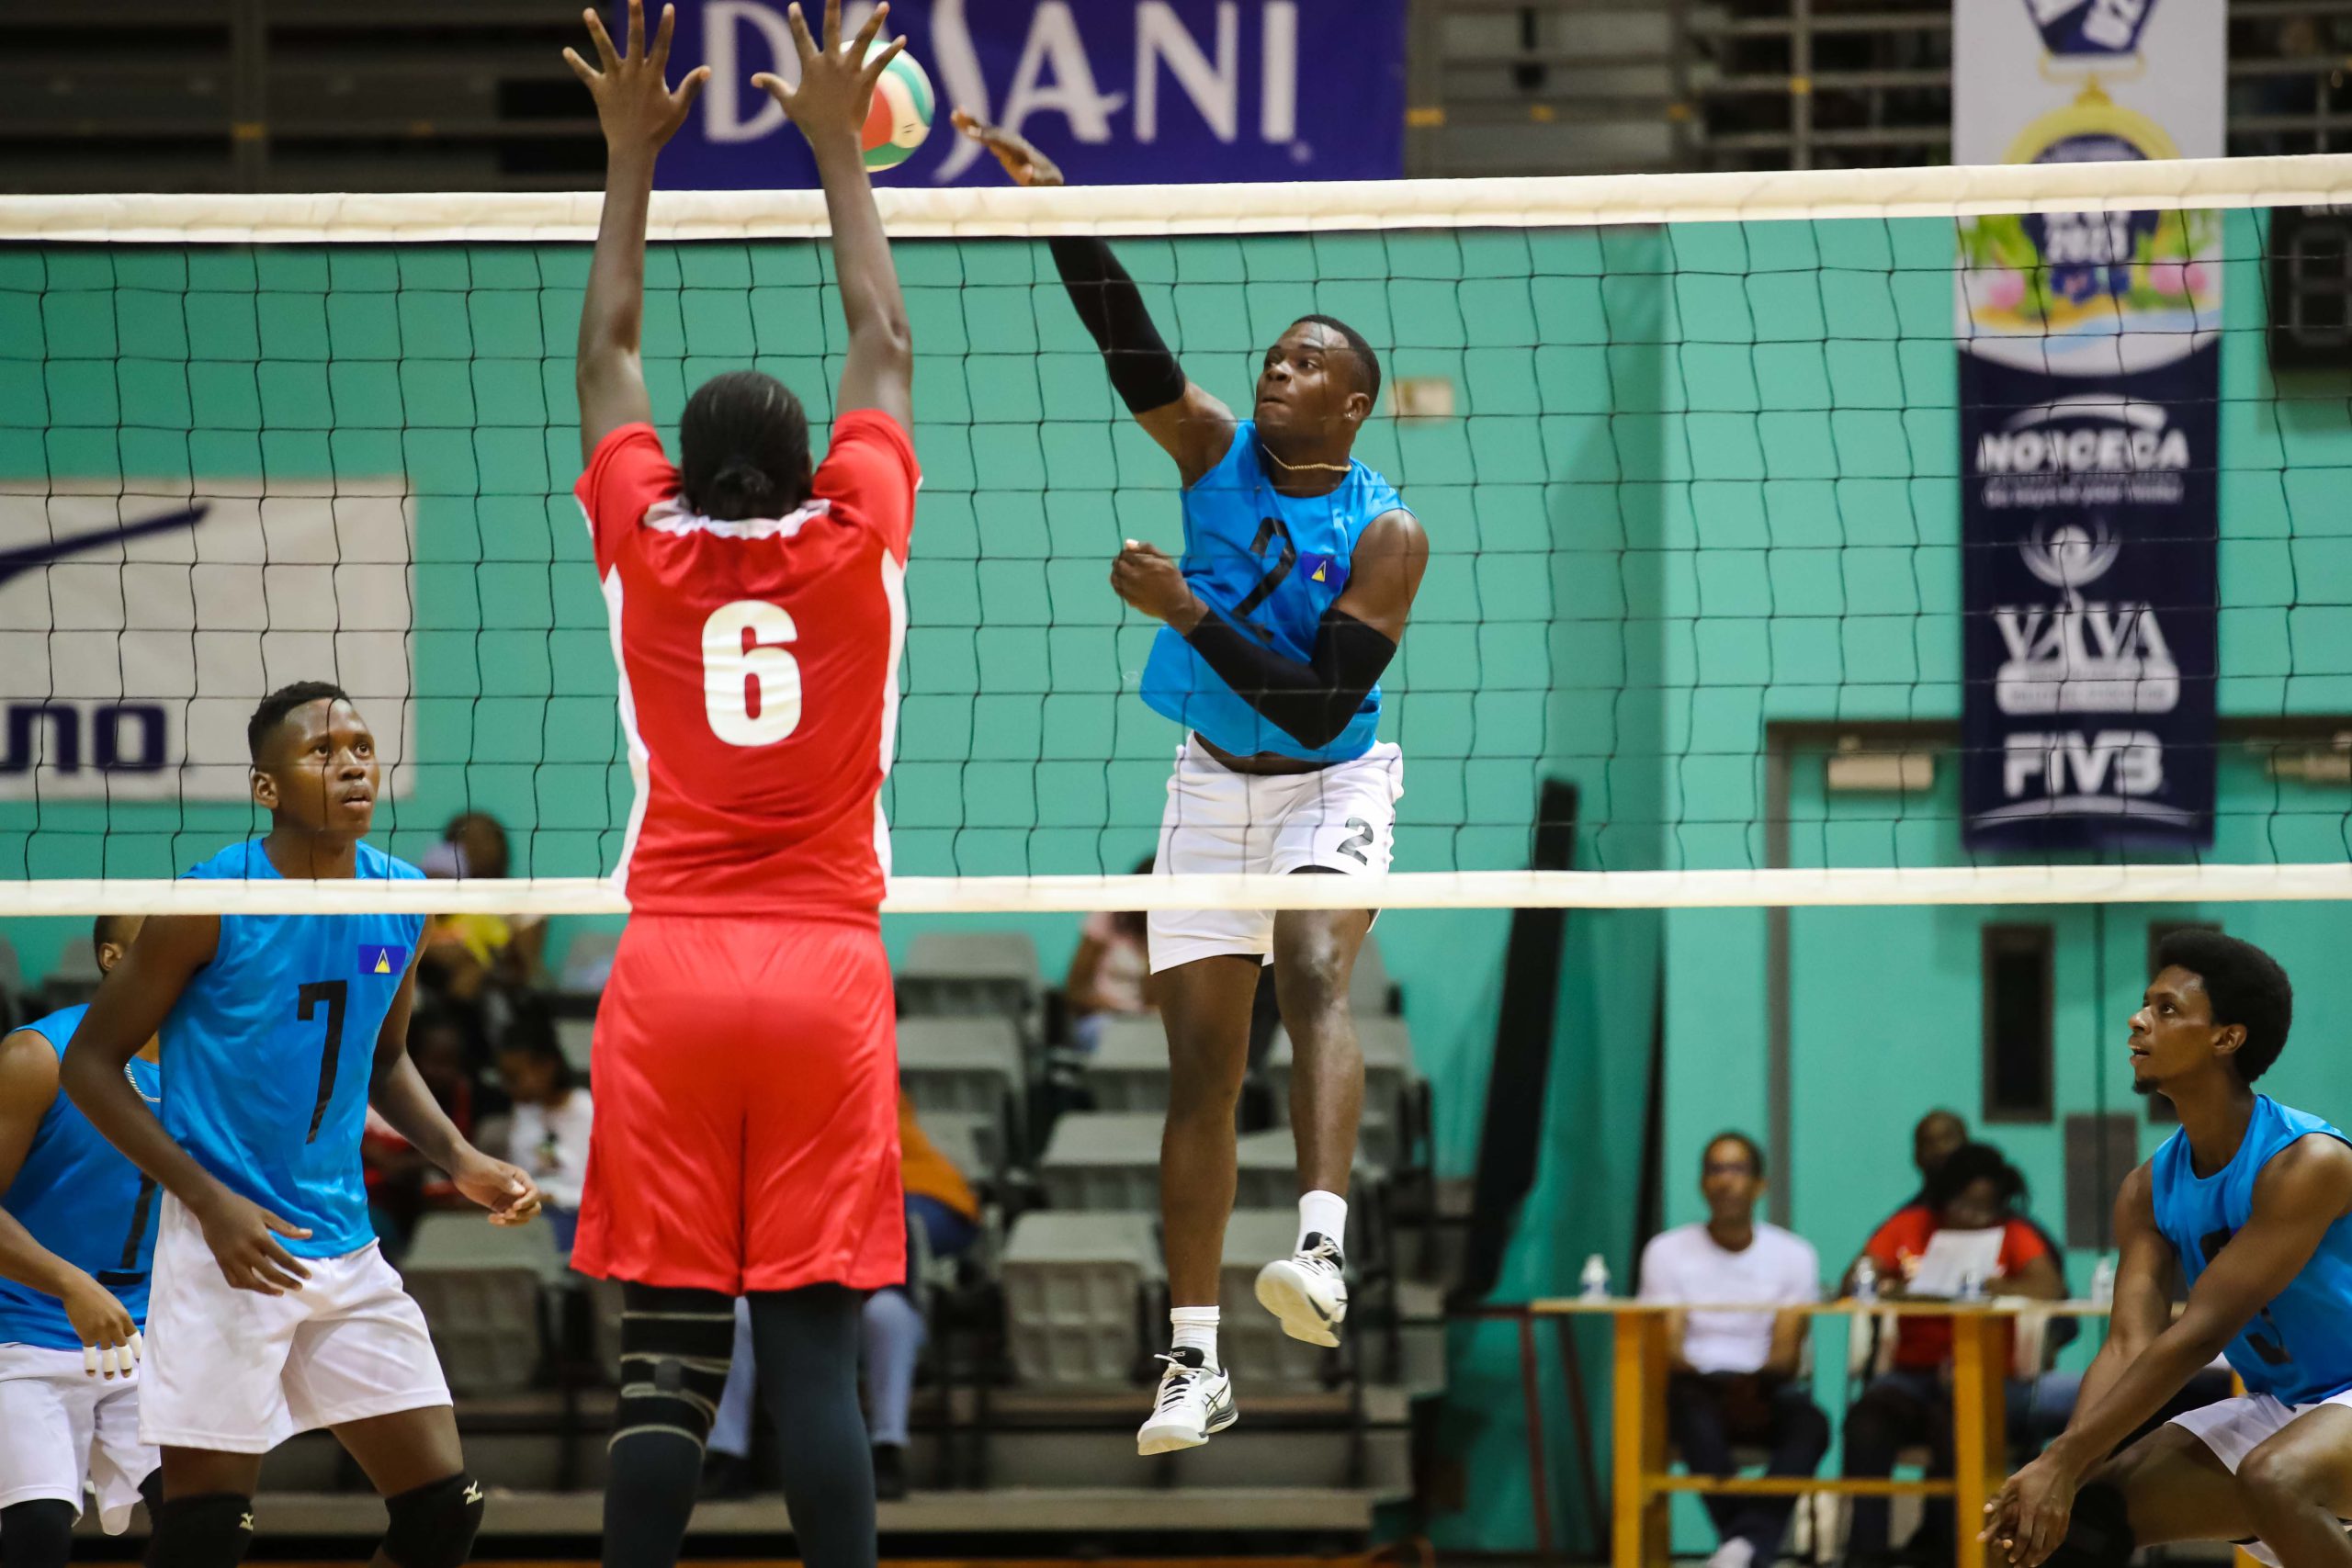 St. Lucia claims consolation win over Antigua and Barbuda